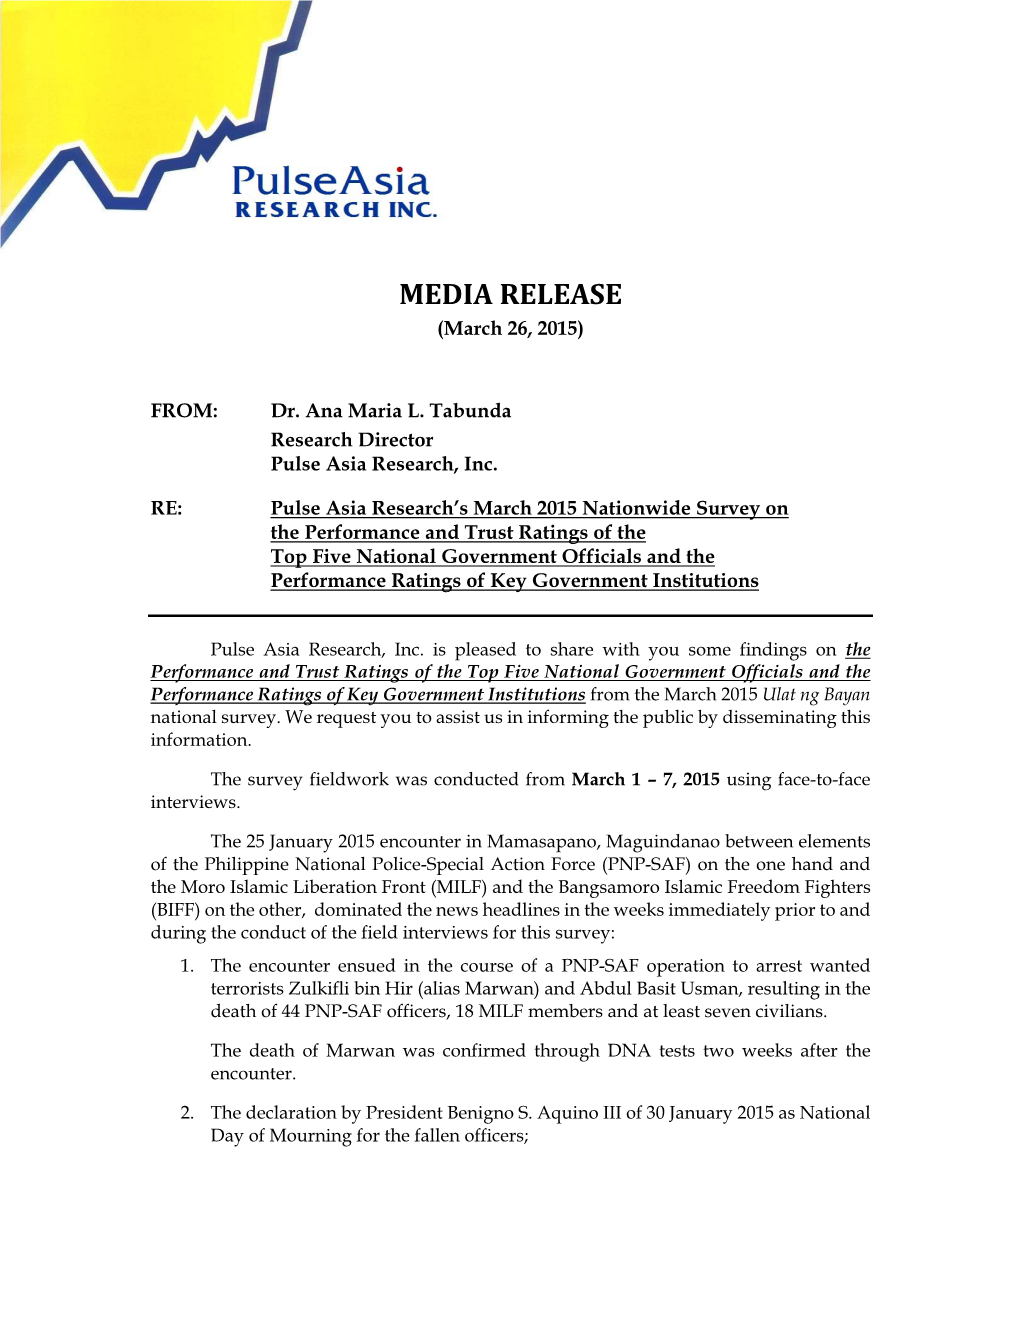 MEDIA RELEASE (March 26, 2015)